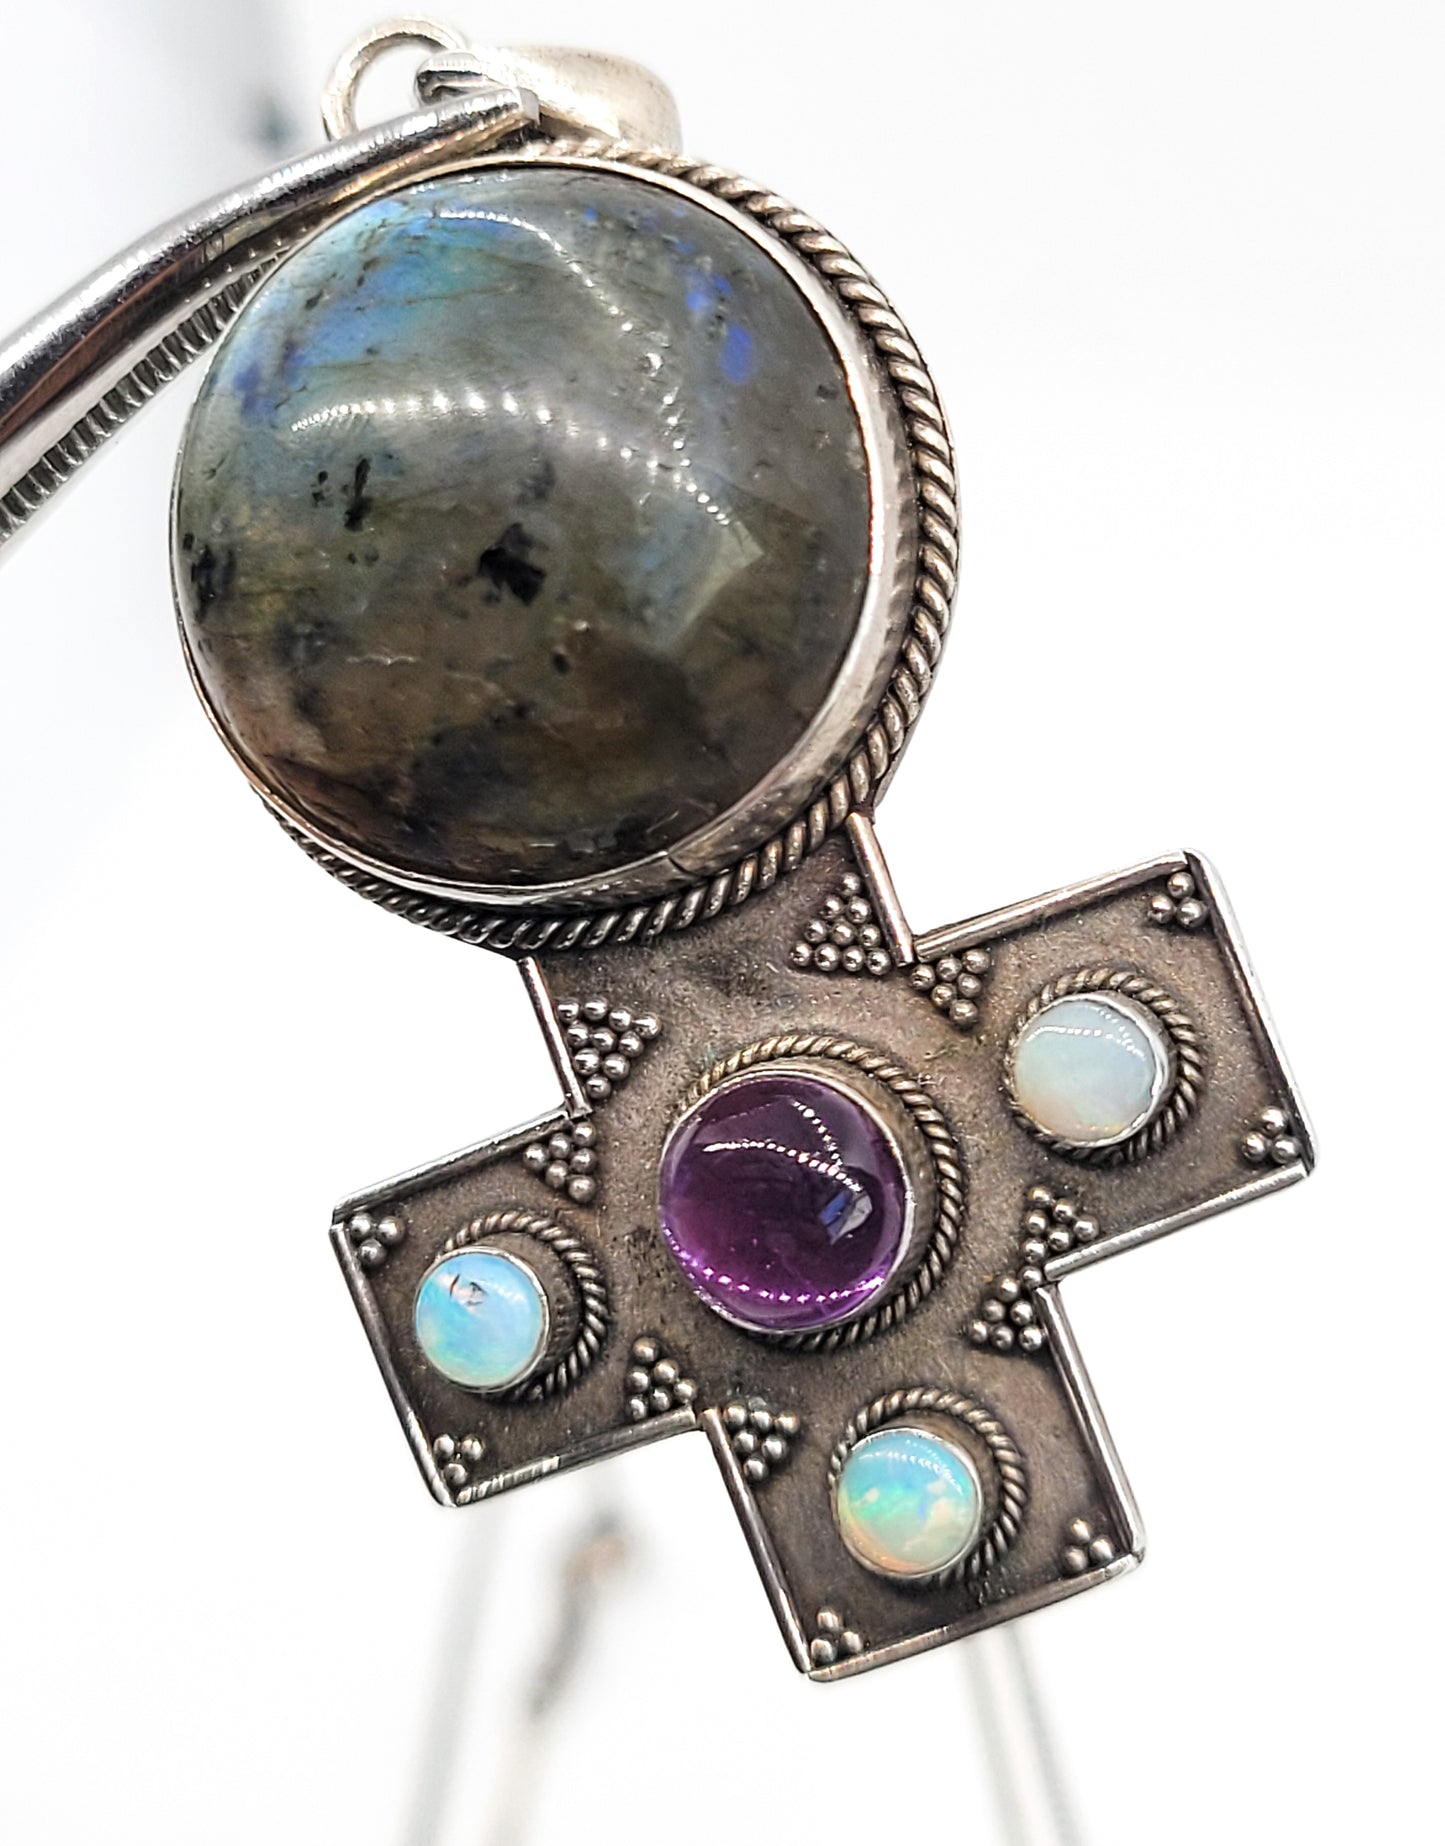 Labradorite amethyst and fire opal tribal Bali sterling silver pendant necklace.